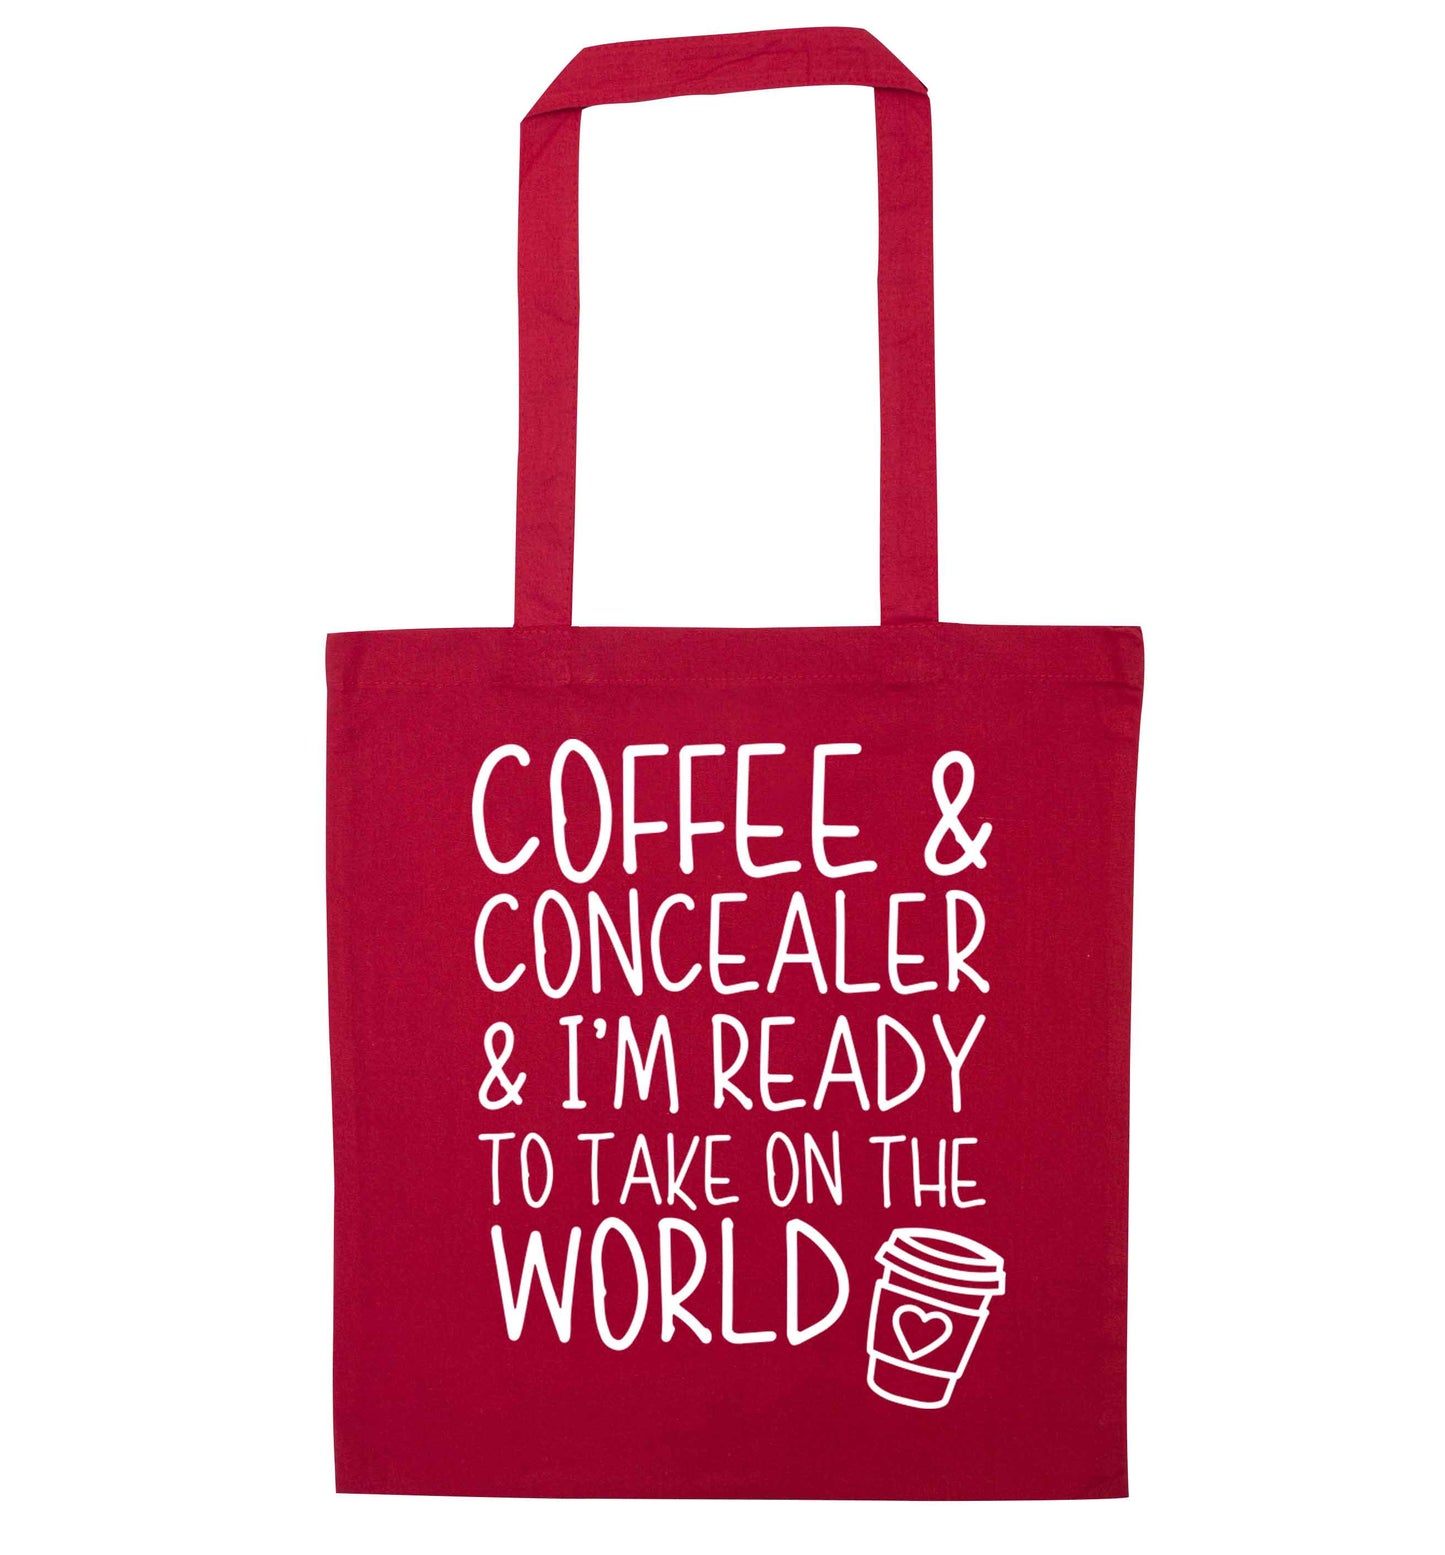 Coffee and concealer and I'm ready to take on the world red tote bag